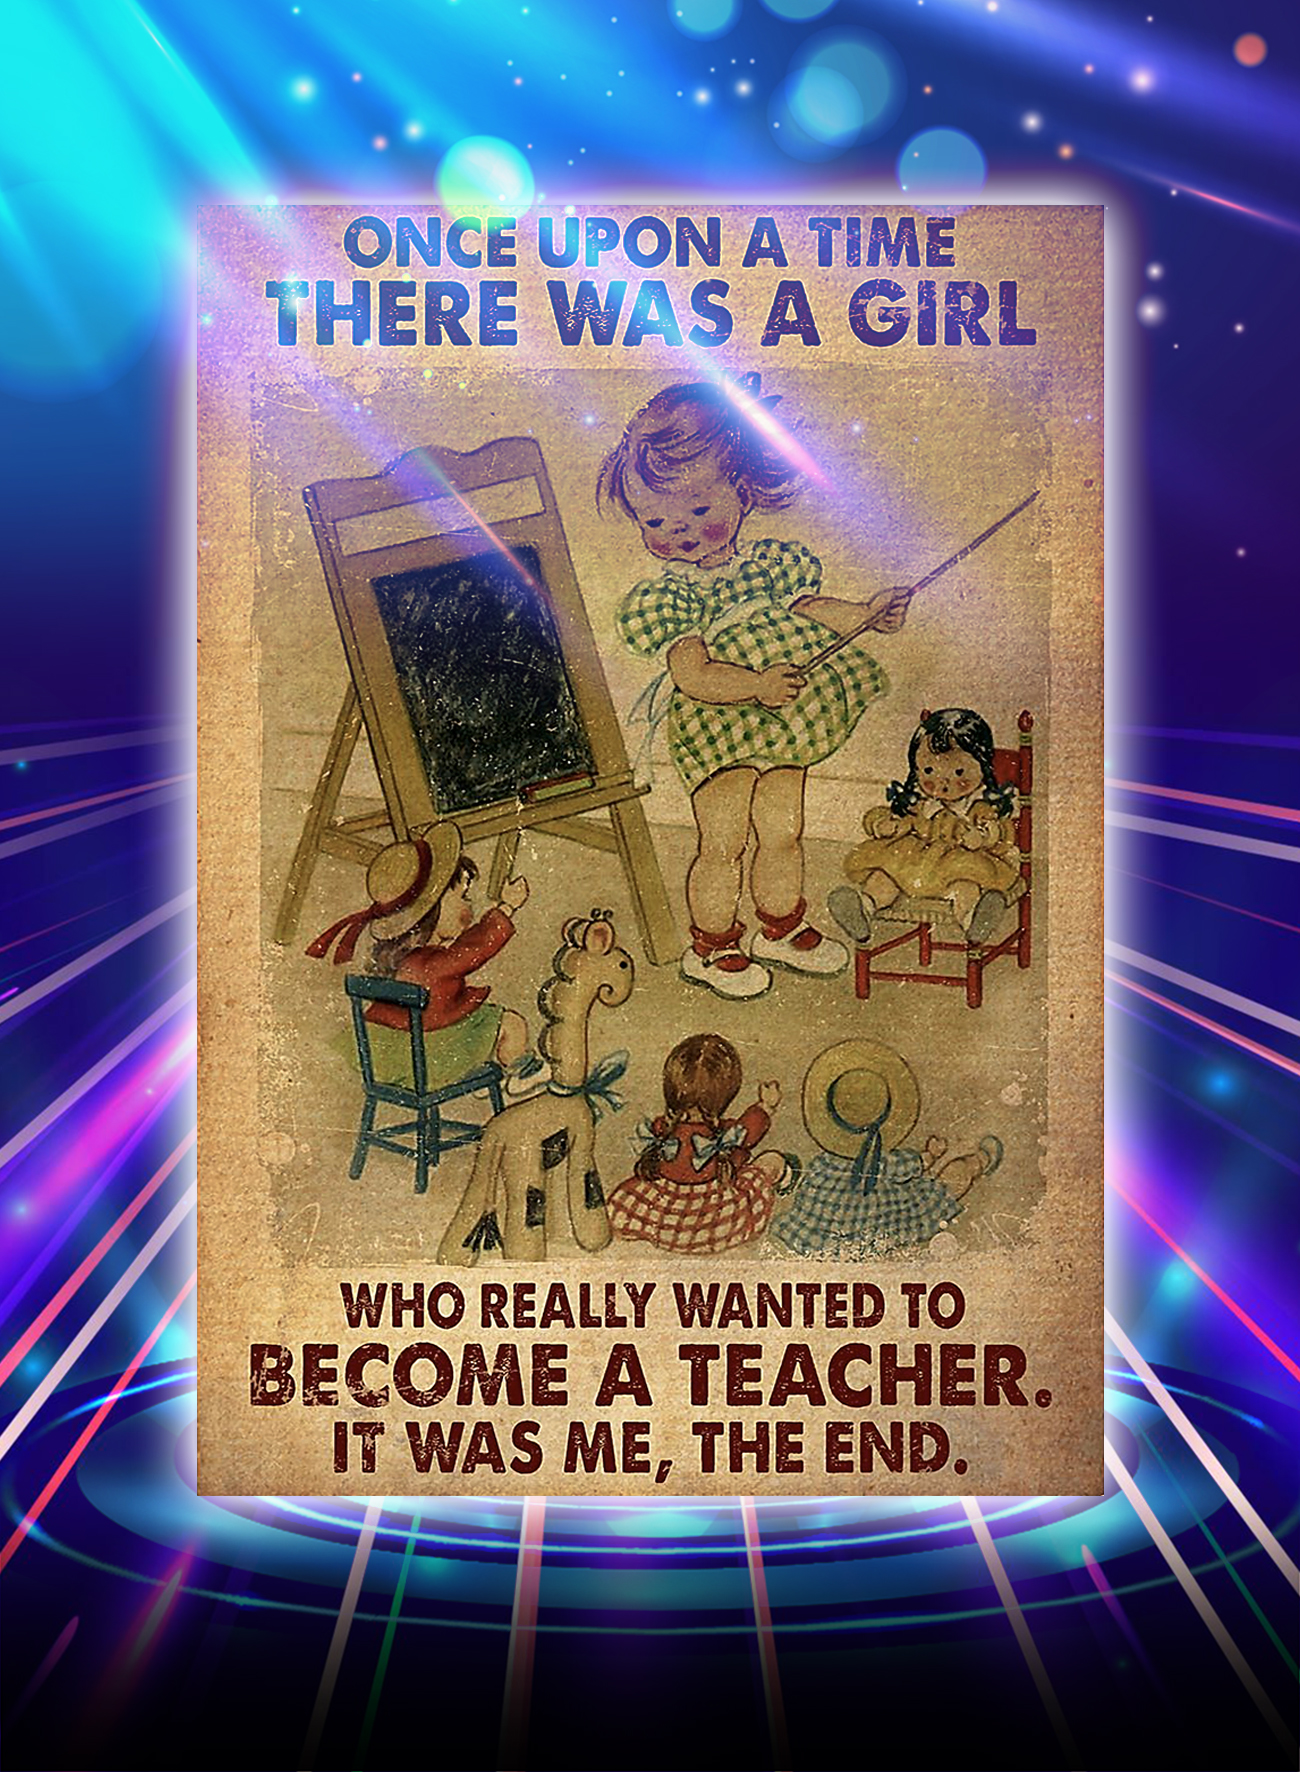 Once upon a time there was a girl wanted to become a teacher poster – Saleoff